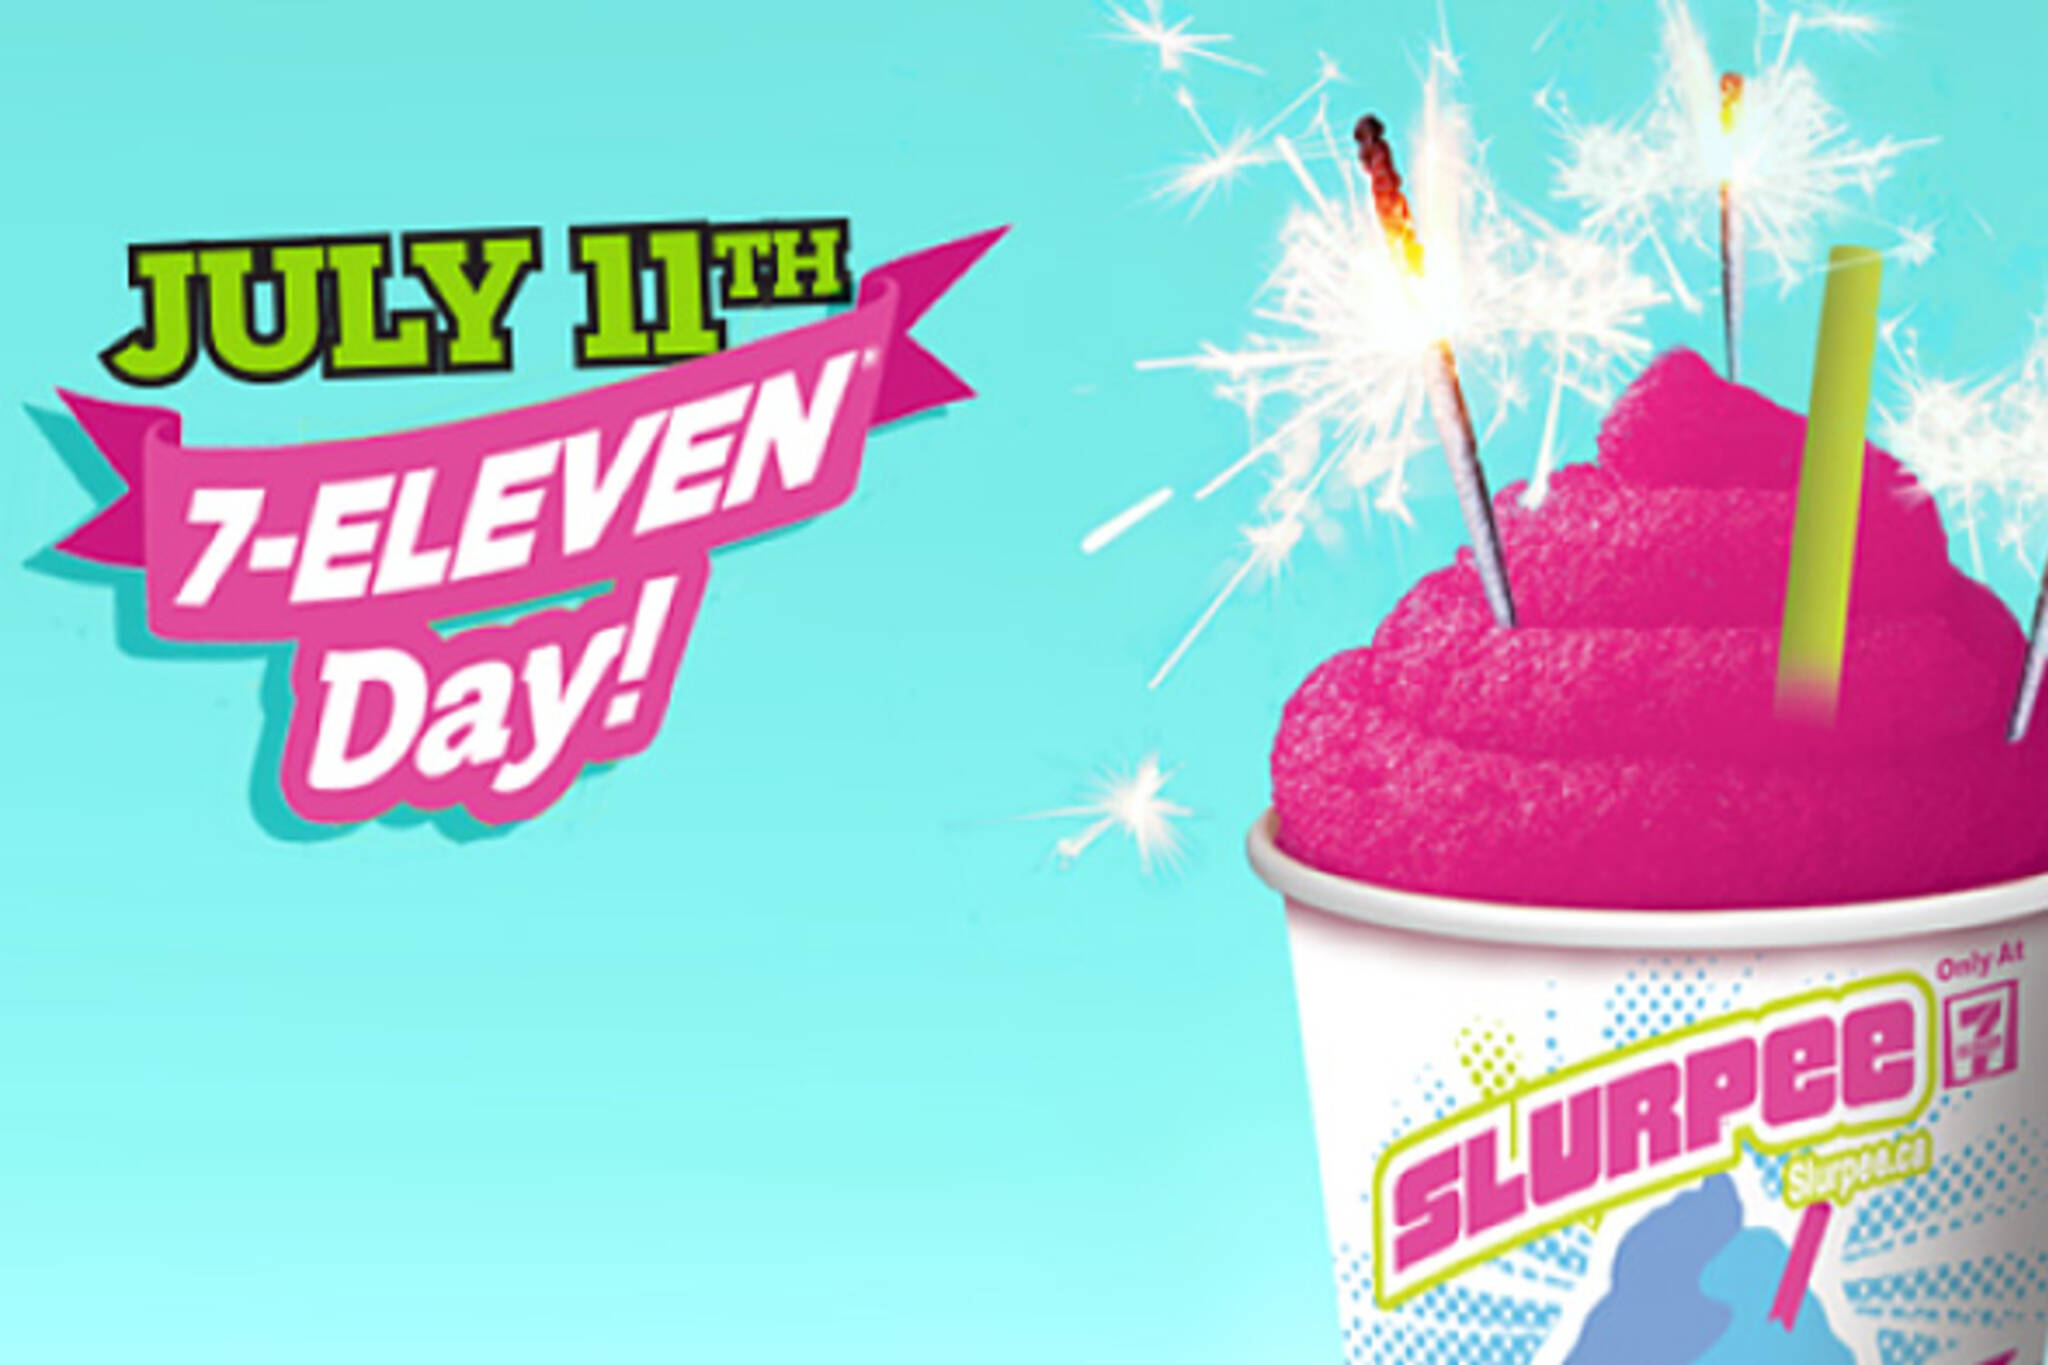 7Eleven giving away free slurpees this Saturday